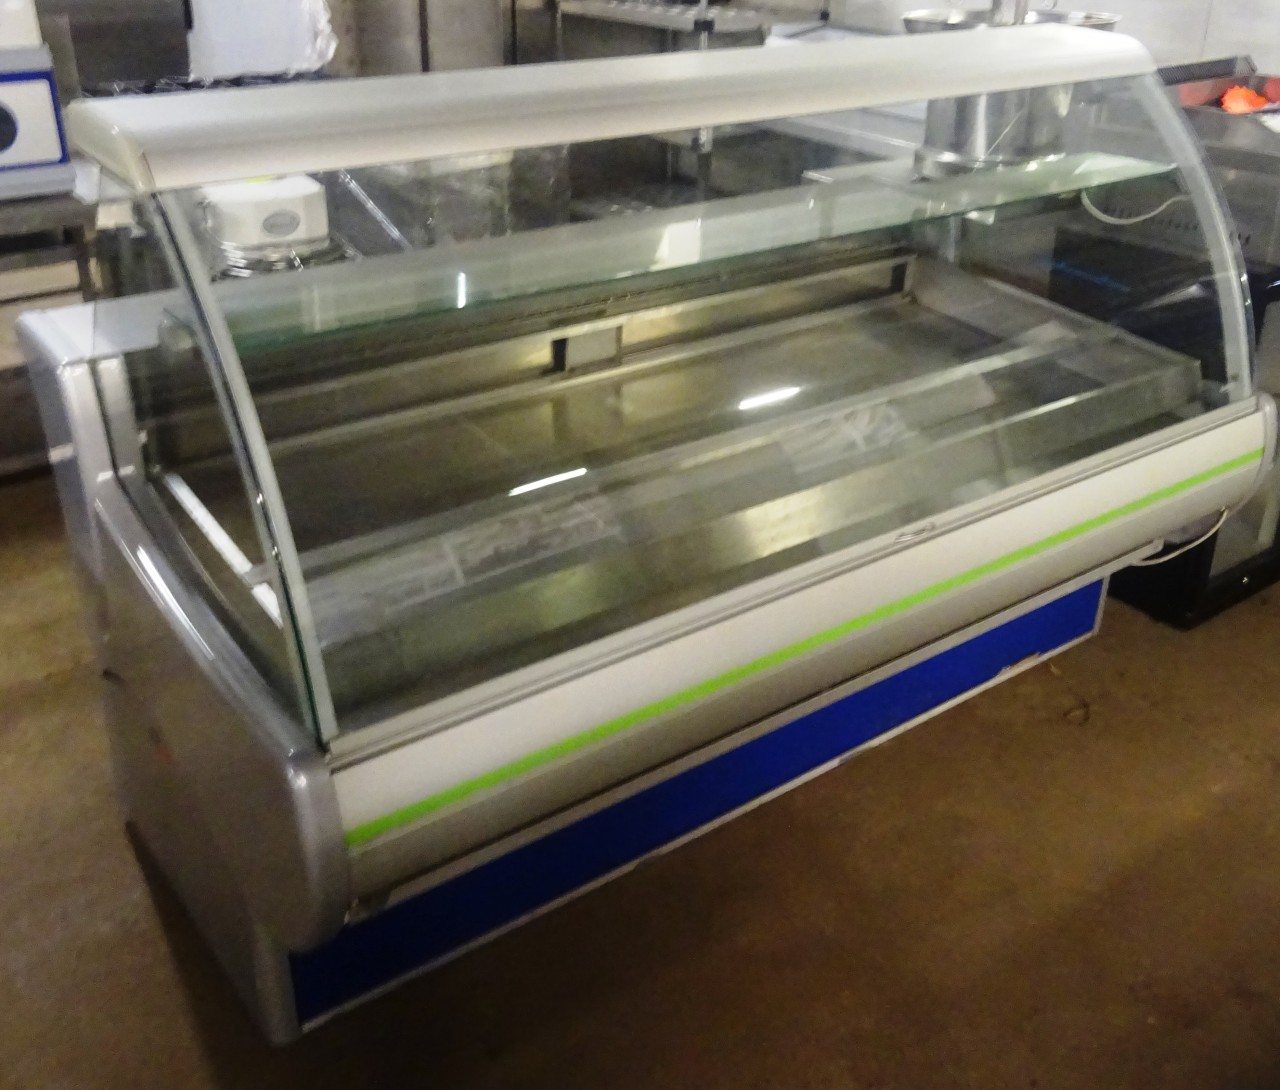 EURO CRYO 200cm  Chilled Serve Over